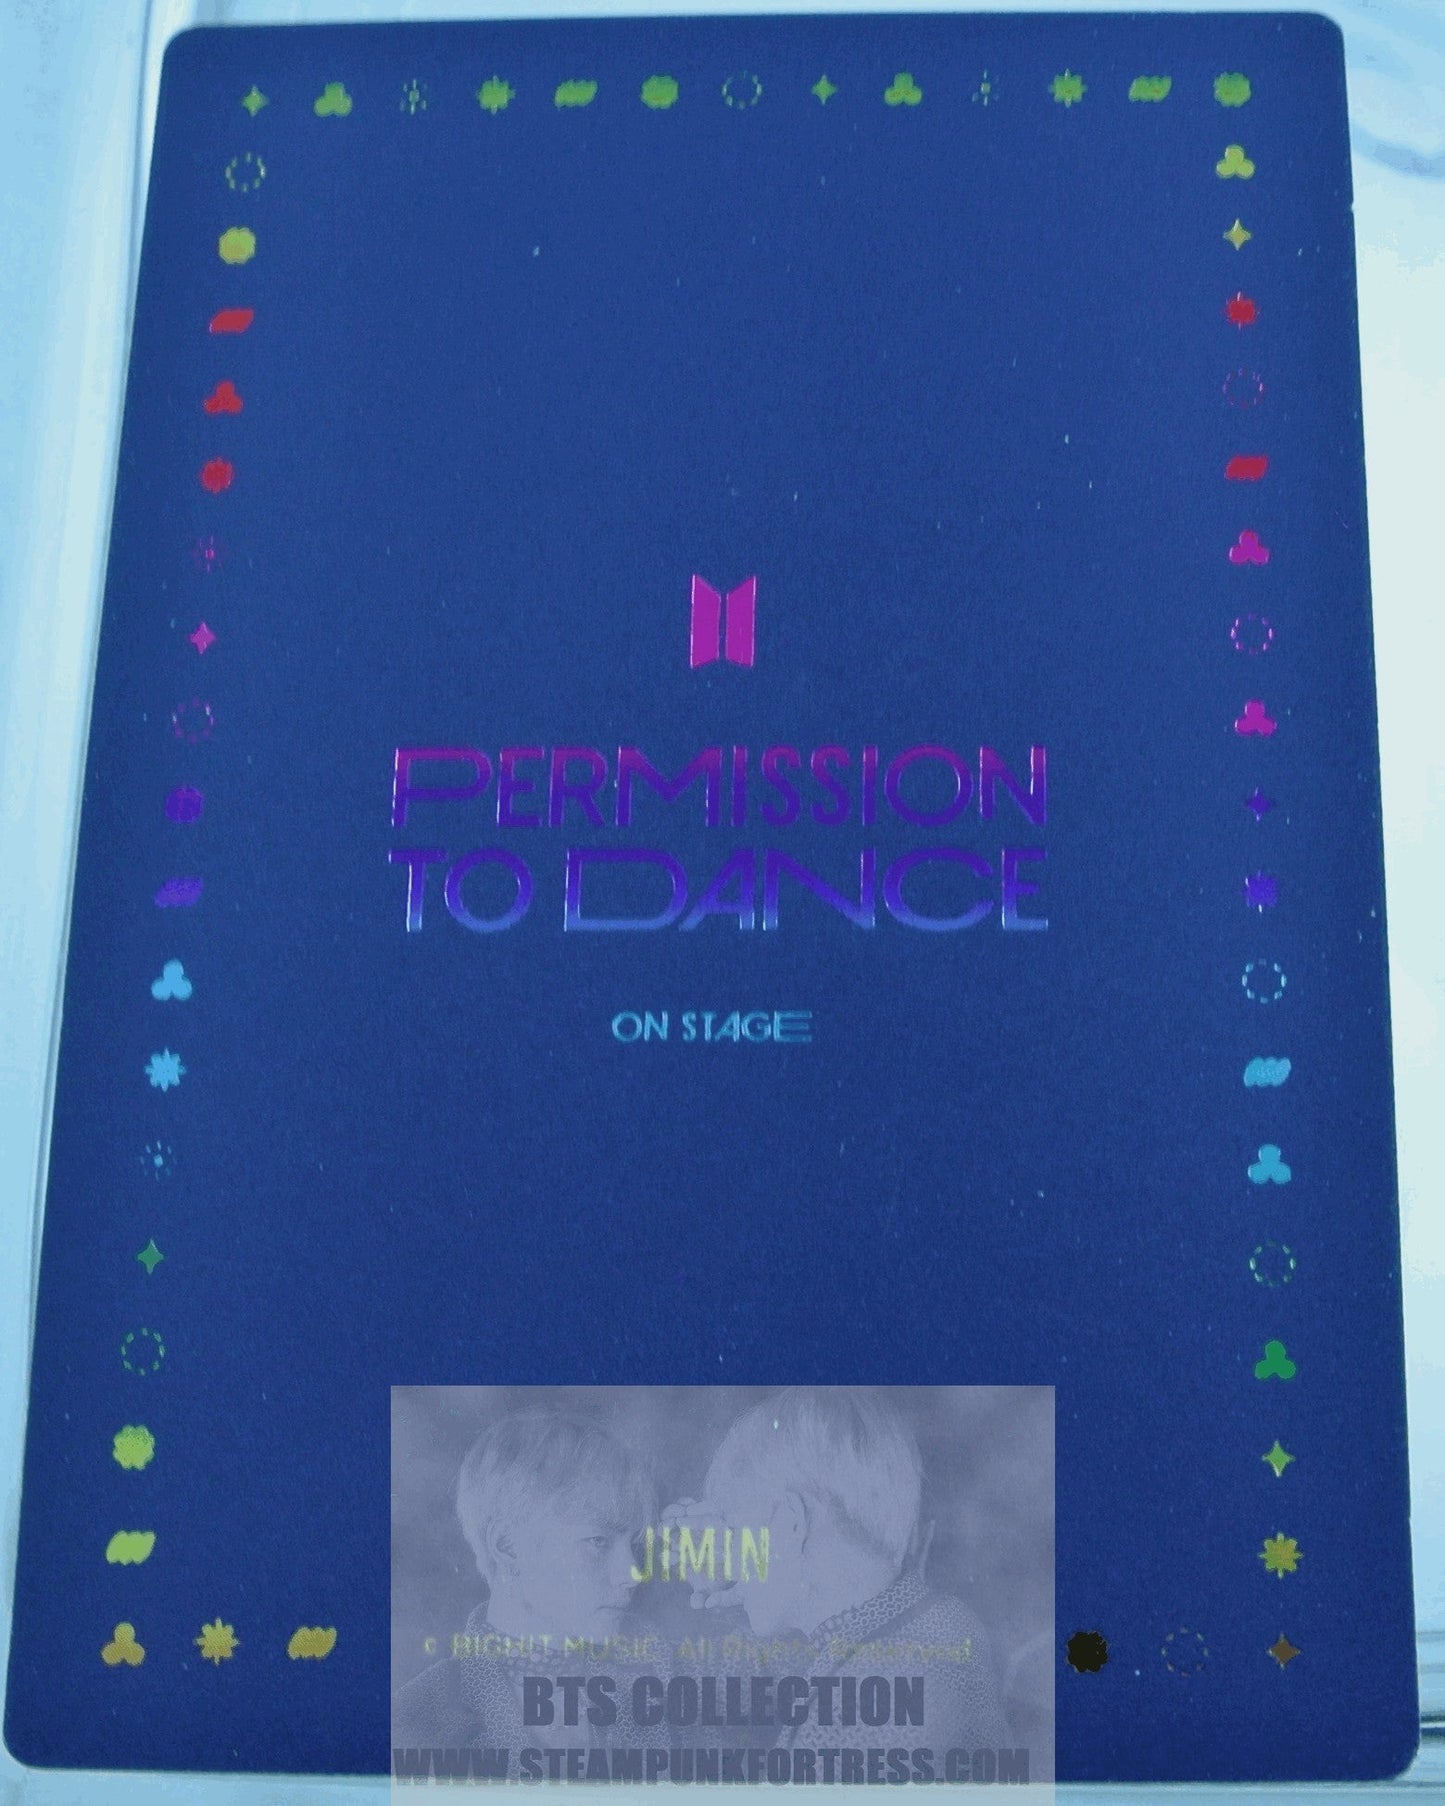 BTS JIMIN PARK JI-MIN 2022 PERMISSION TO DANCE ON STAGE SEOUL PTD SPECIAL HOLOGRAM LIMITED EDITION PHOTOCARD PHOTO CARD NEW OFFICIAL MERCHANDISE